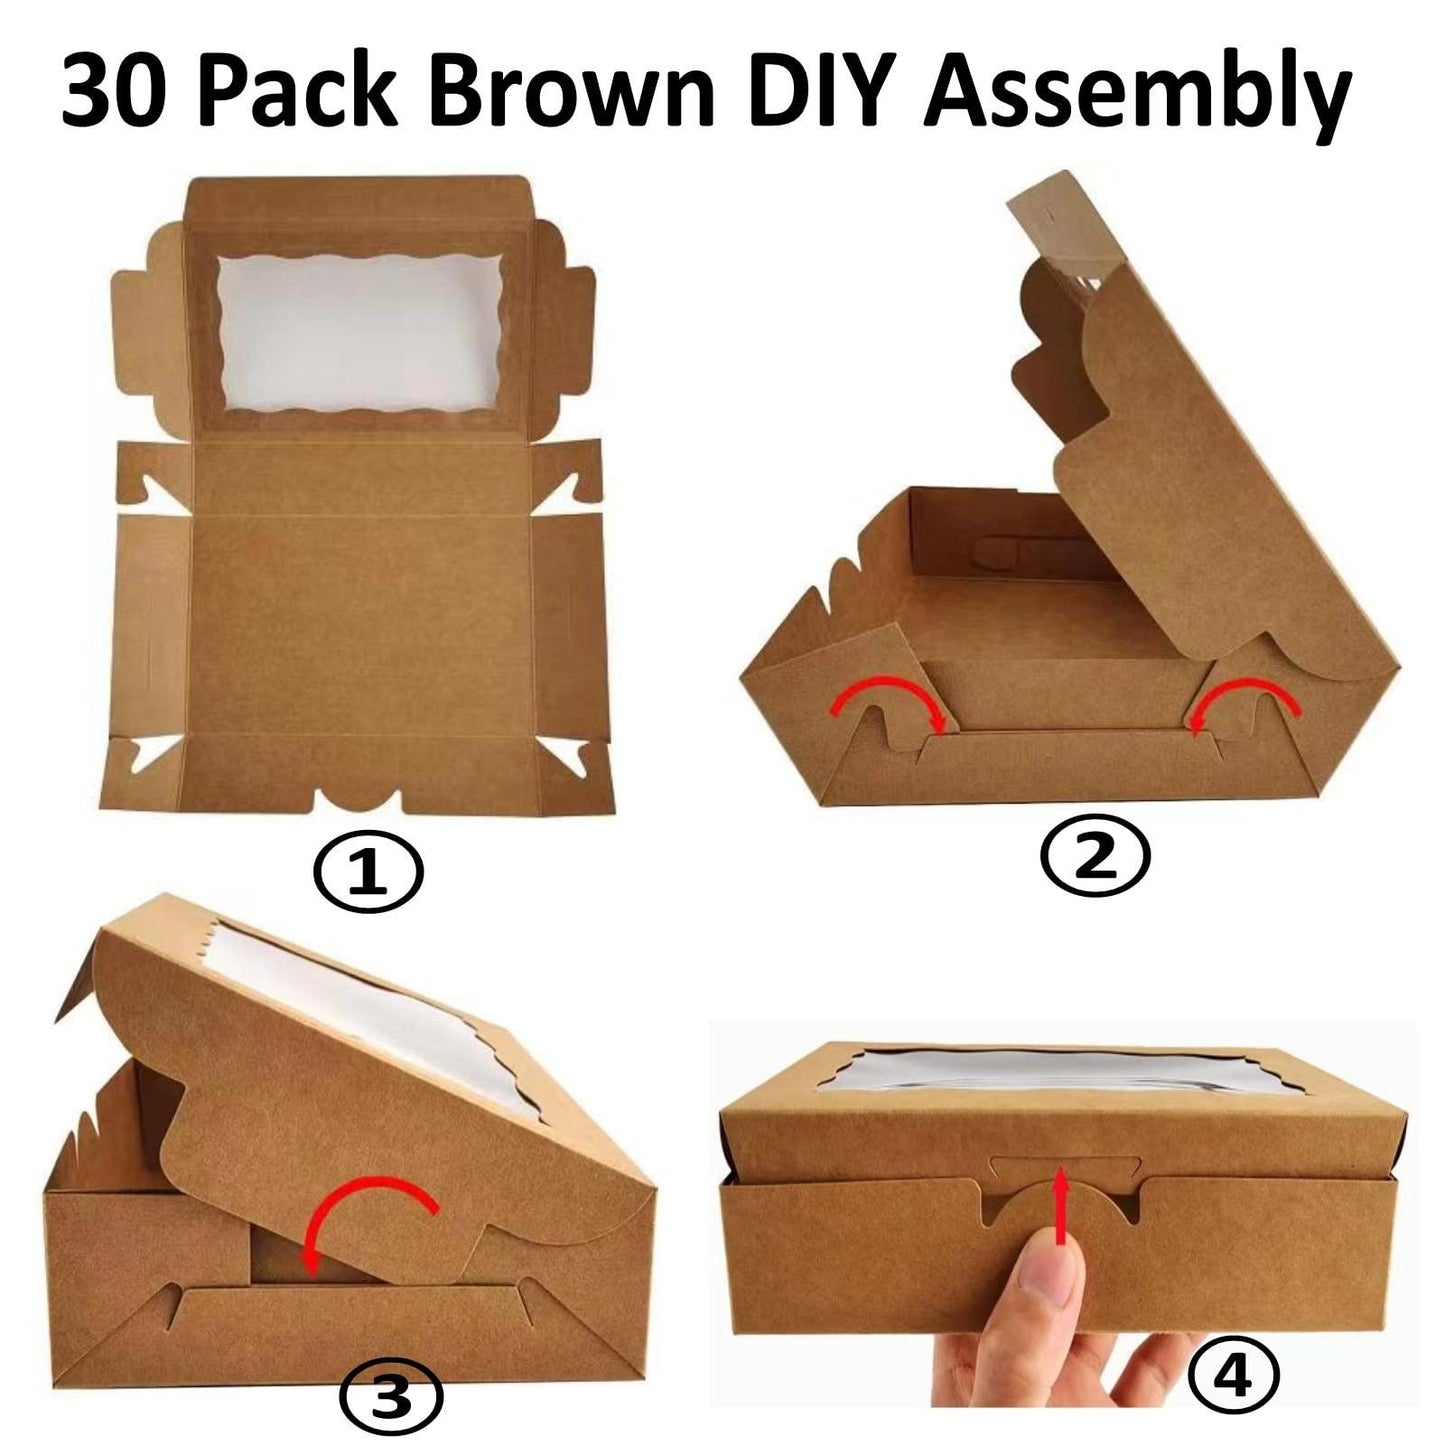 RomanticBaking 50 Pack DIY Assembly Brown 7 x 4 3/8 x 1½ inches Cookies Boxes Chocolate Truffle Boxes Treat Boxes Cakesickle Boxes Macaron Boxes Bakery Boxes - CookCave